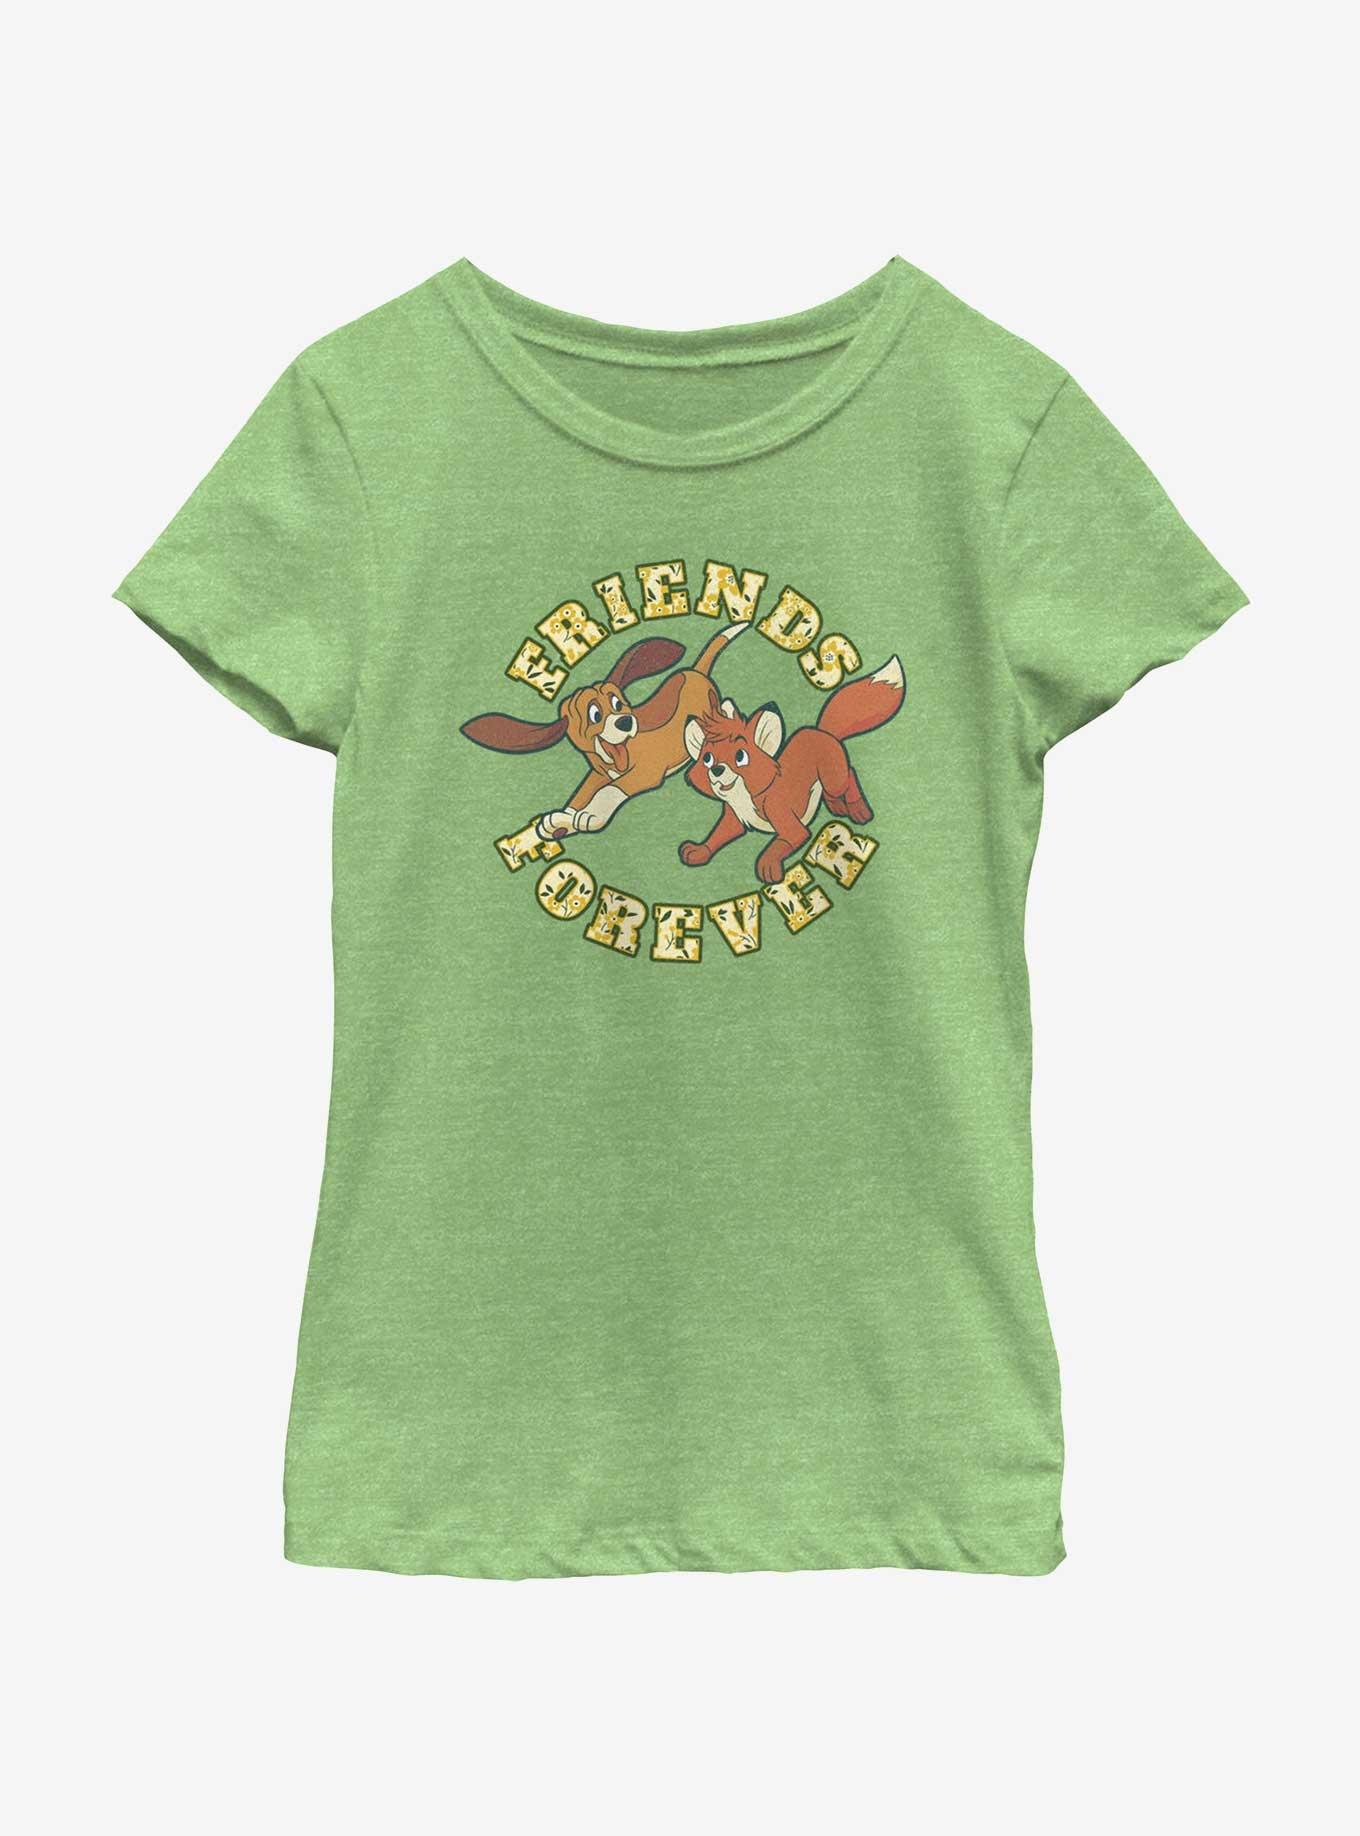 Disney The Fox and the Hound Friends Forever Youth Girls T-Shirt, GRN APPLE, hi-res